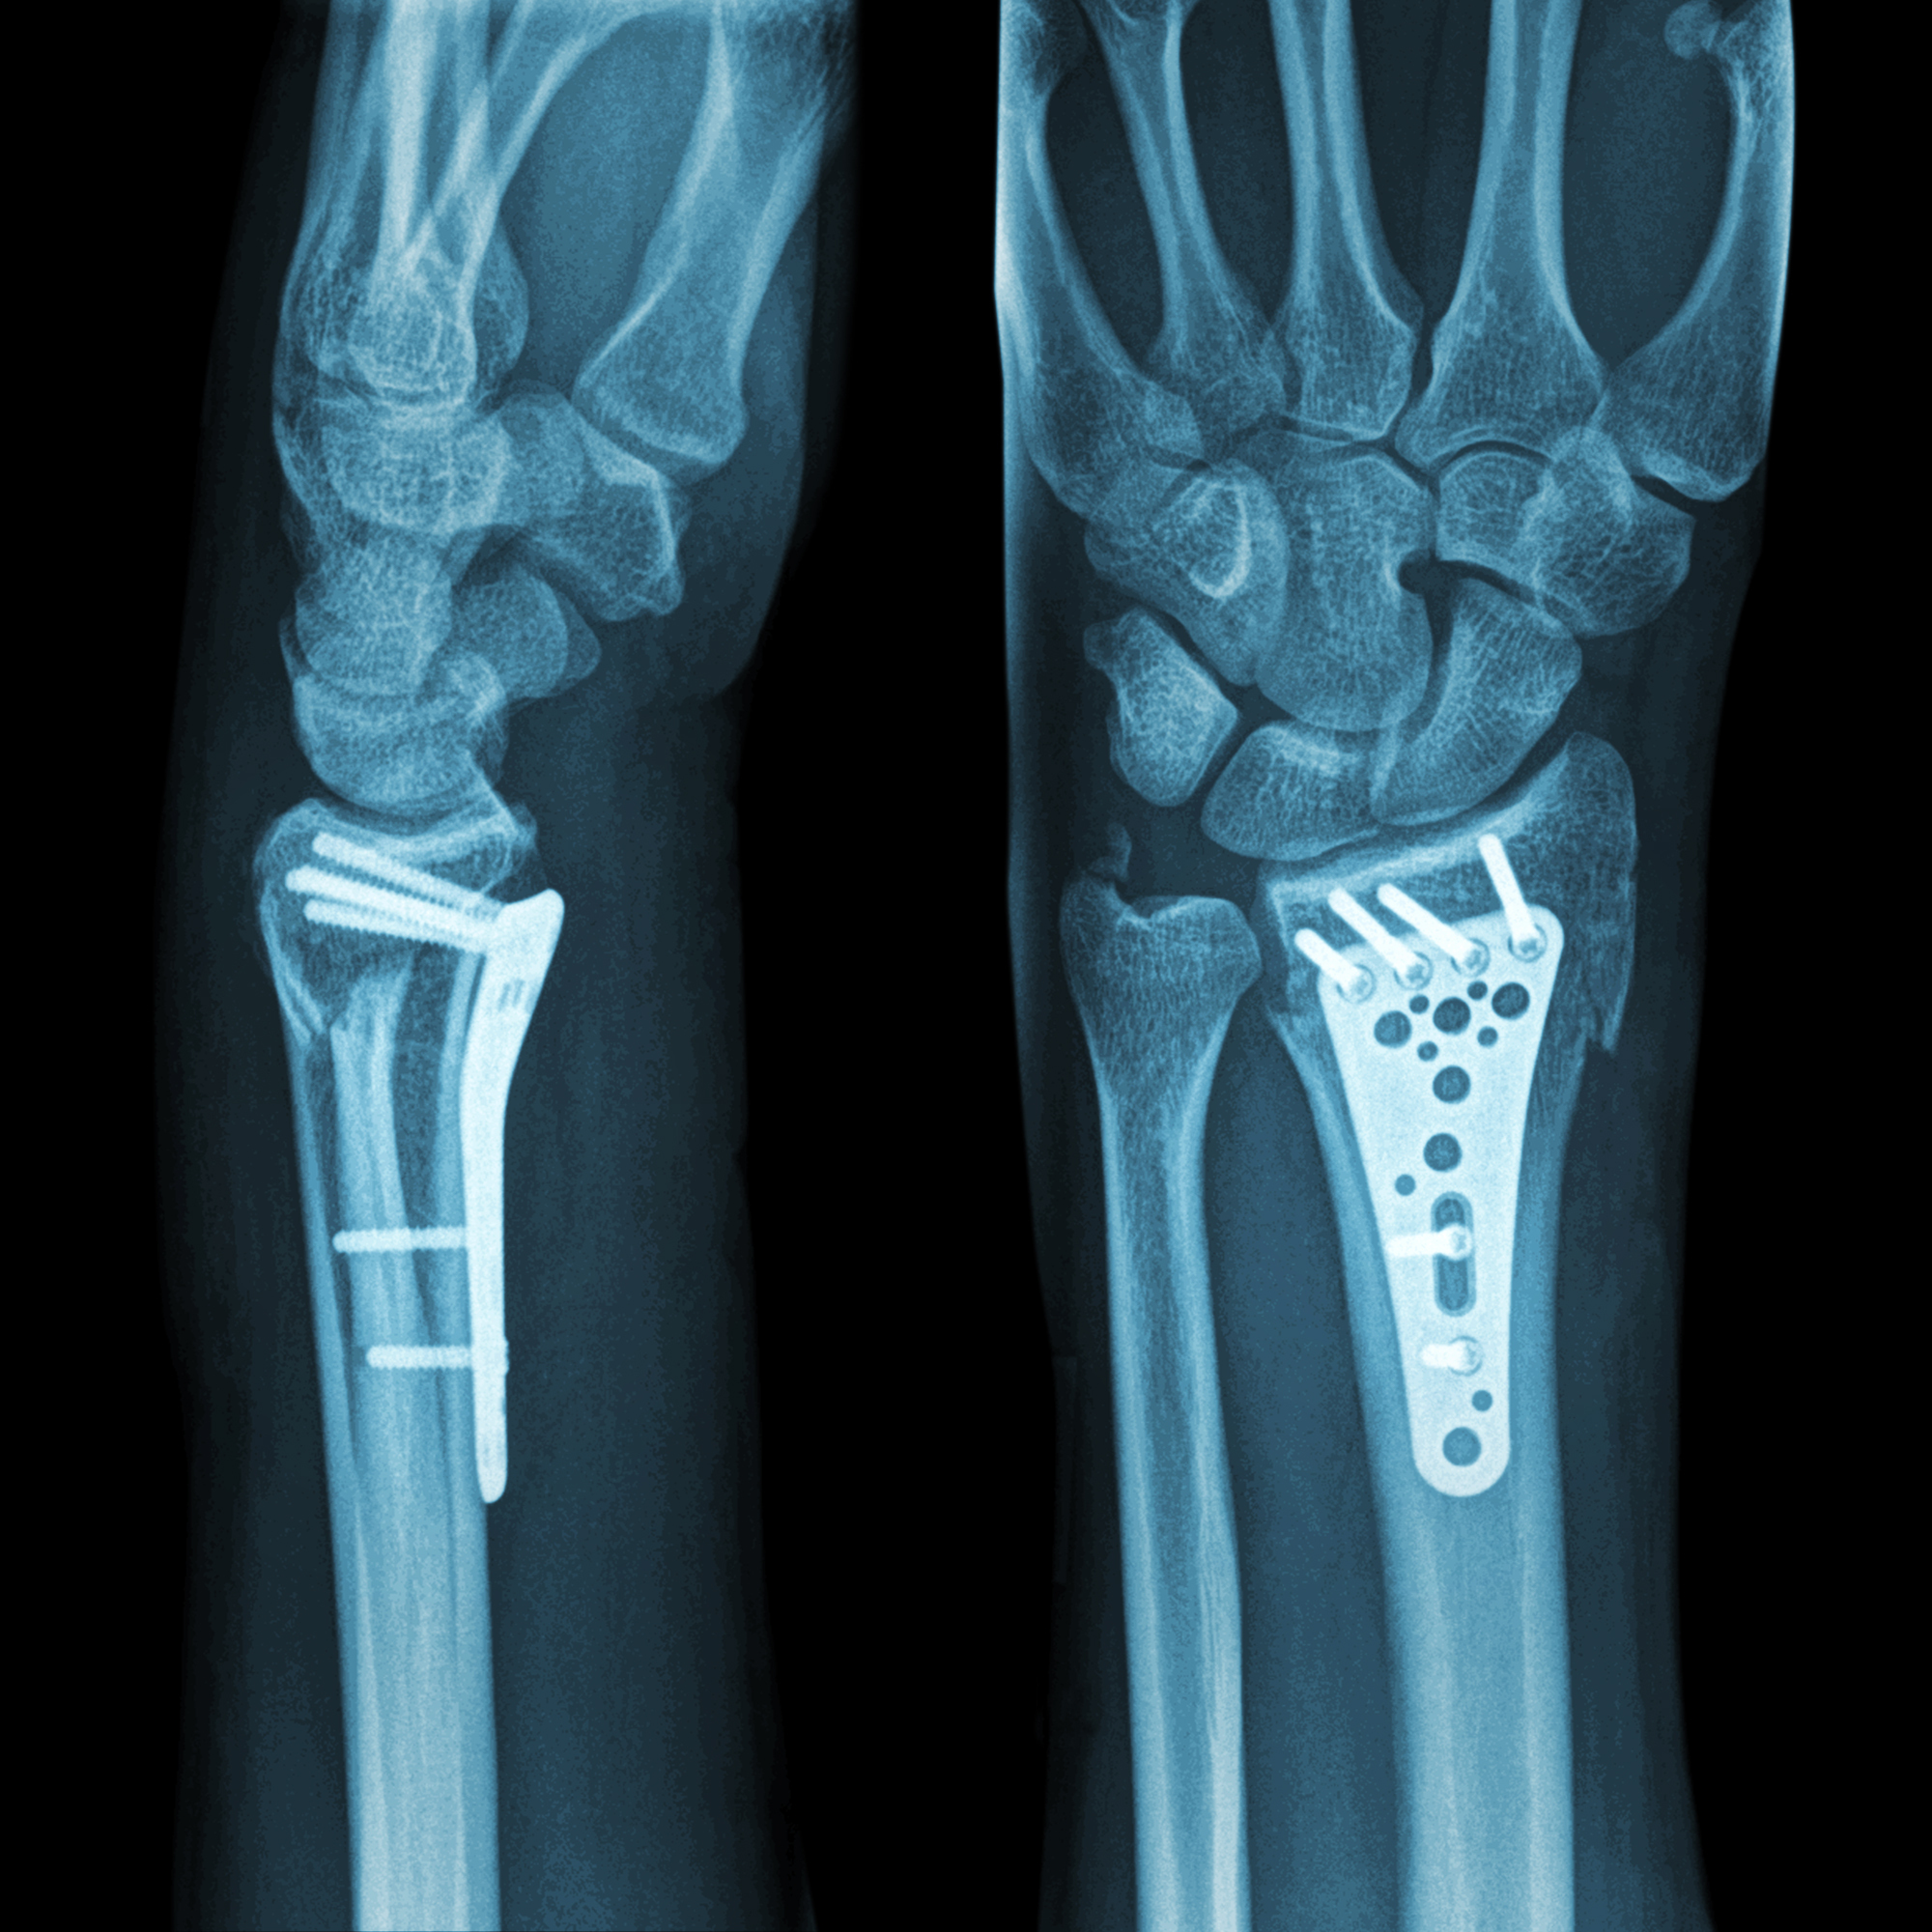 Surgical options for treating a distal radius fracture